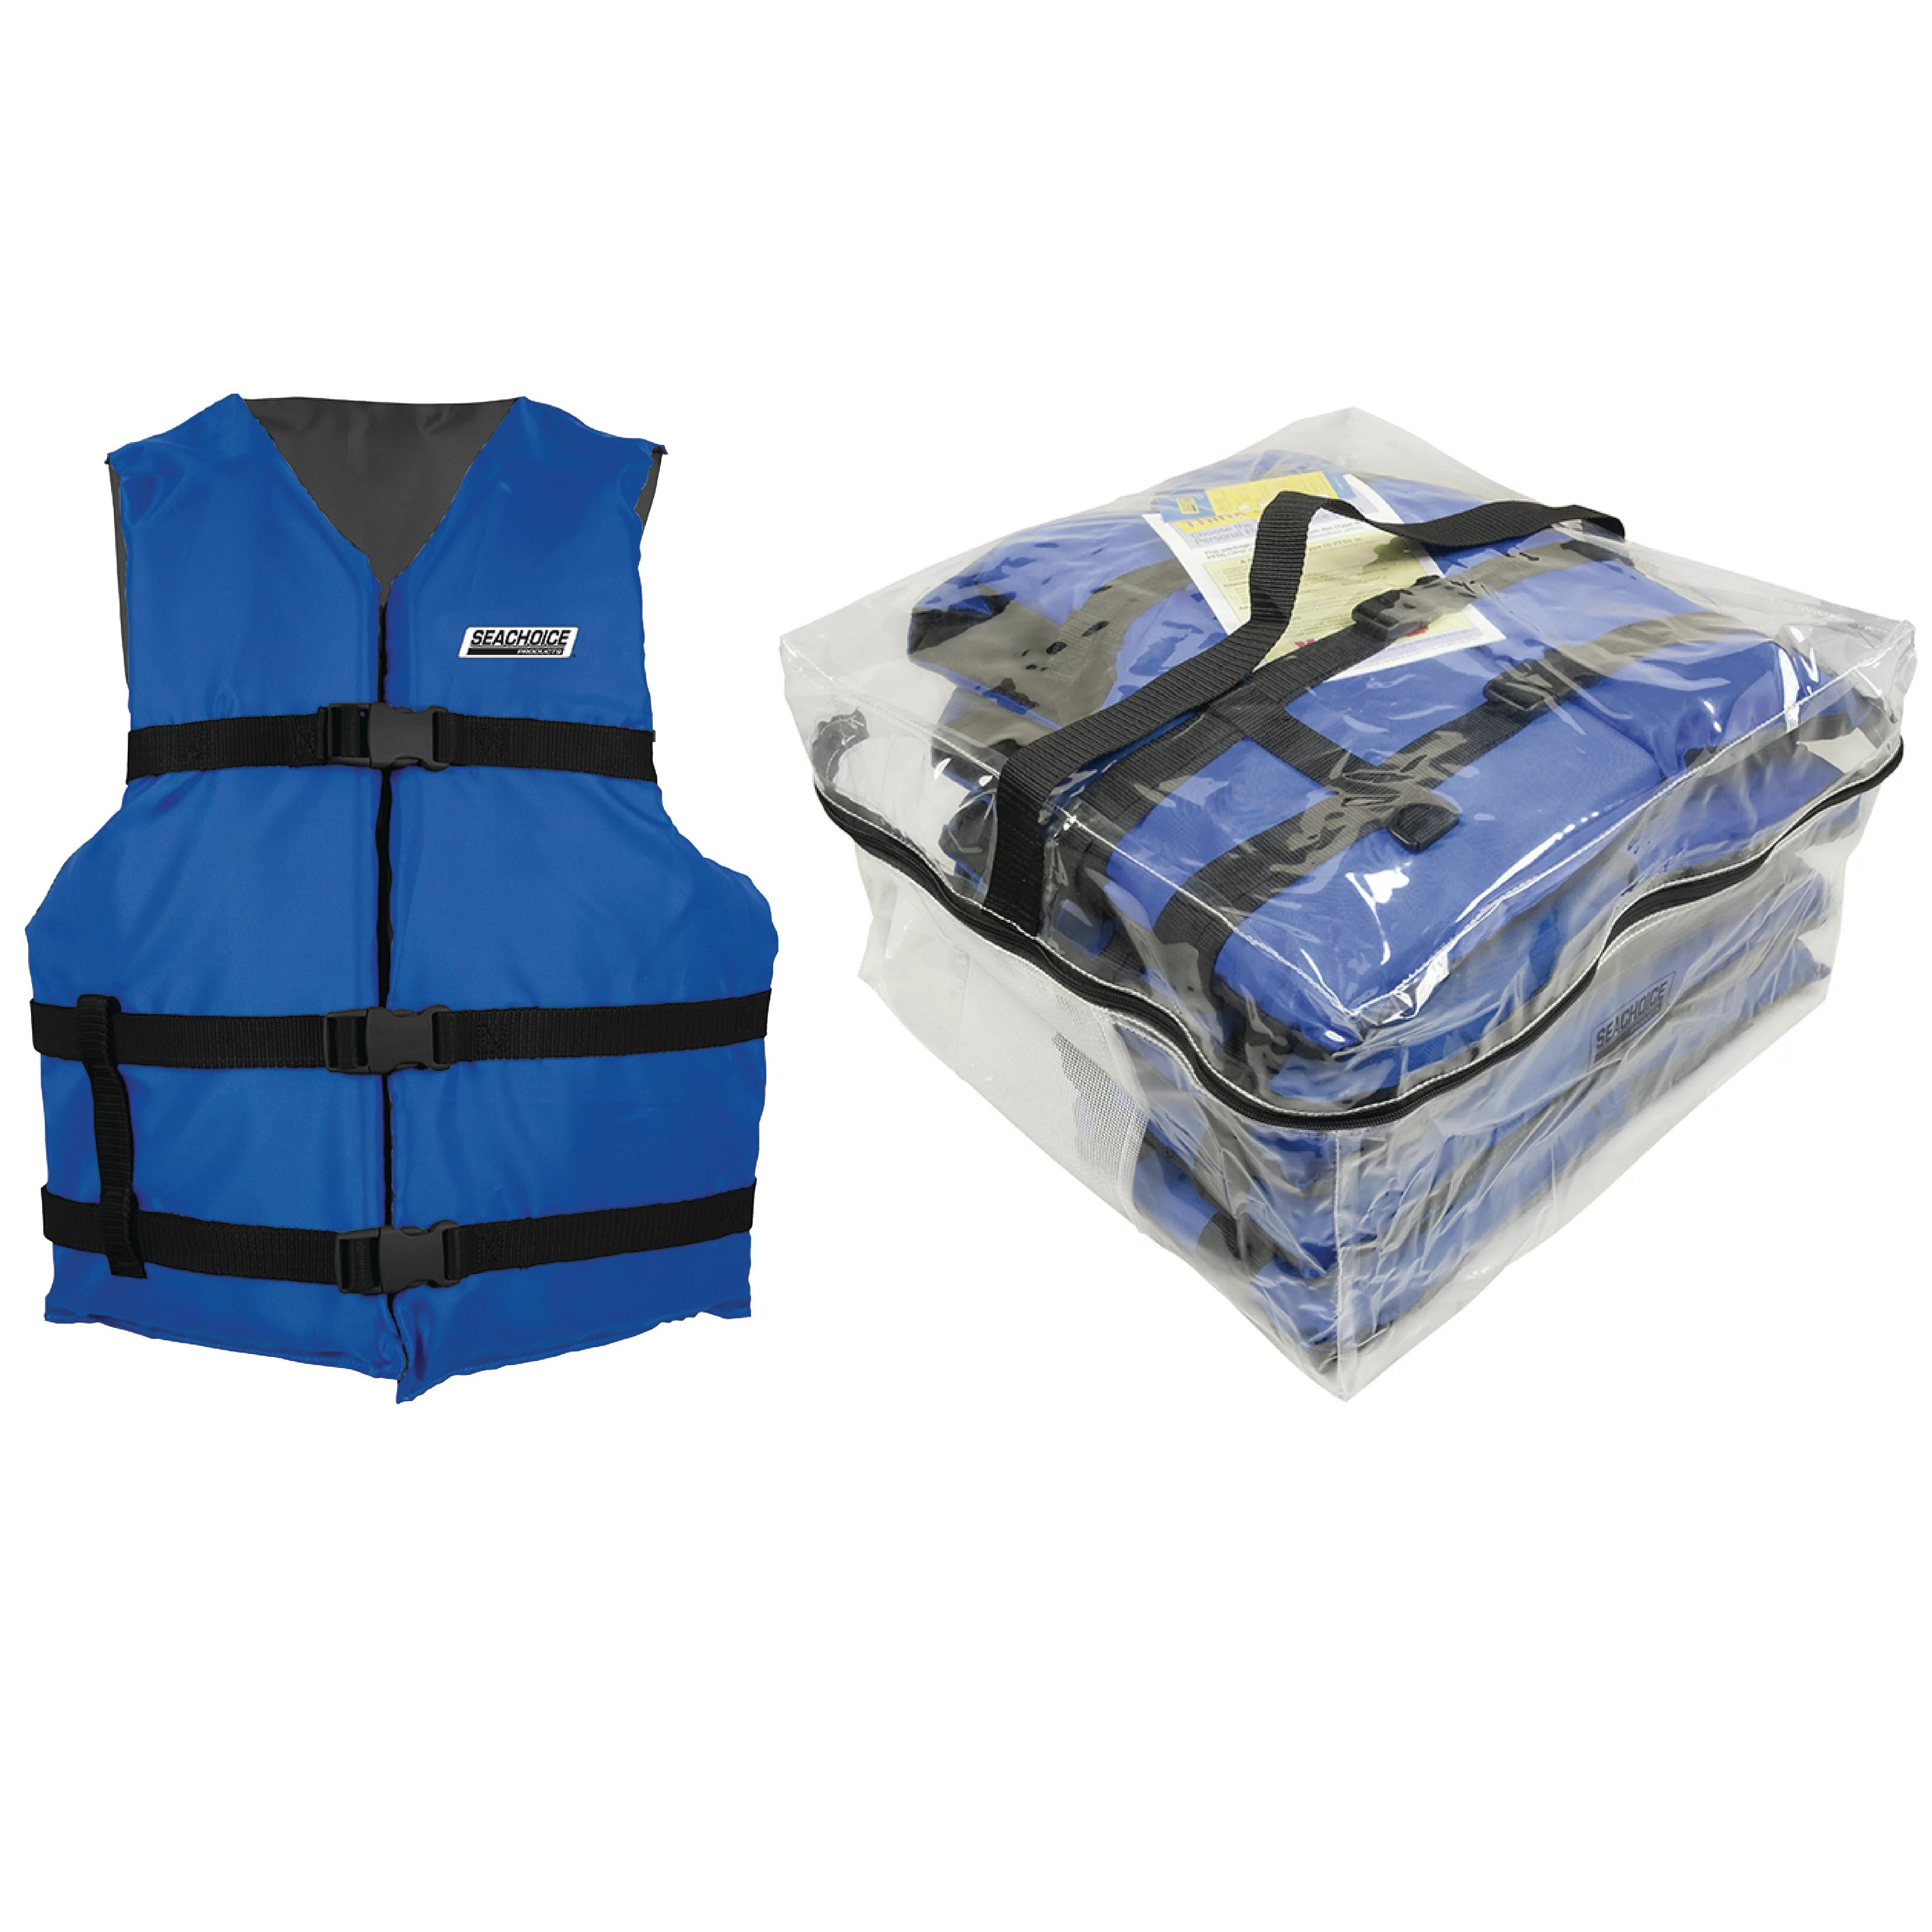 General Purpose Life Vest 4-Pack with Bag